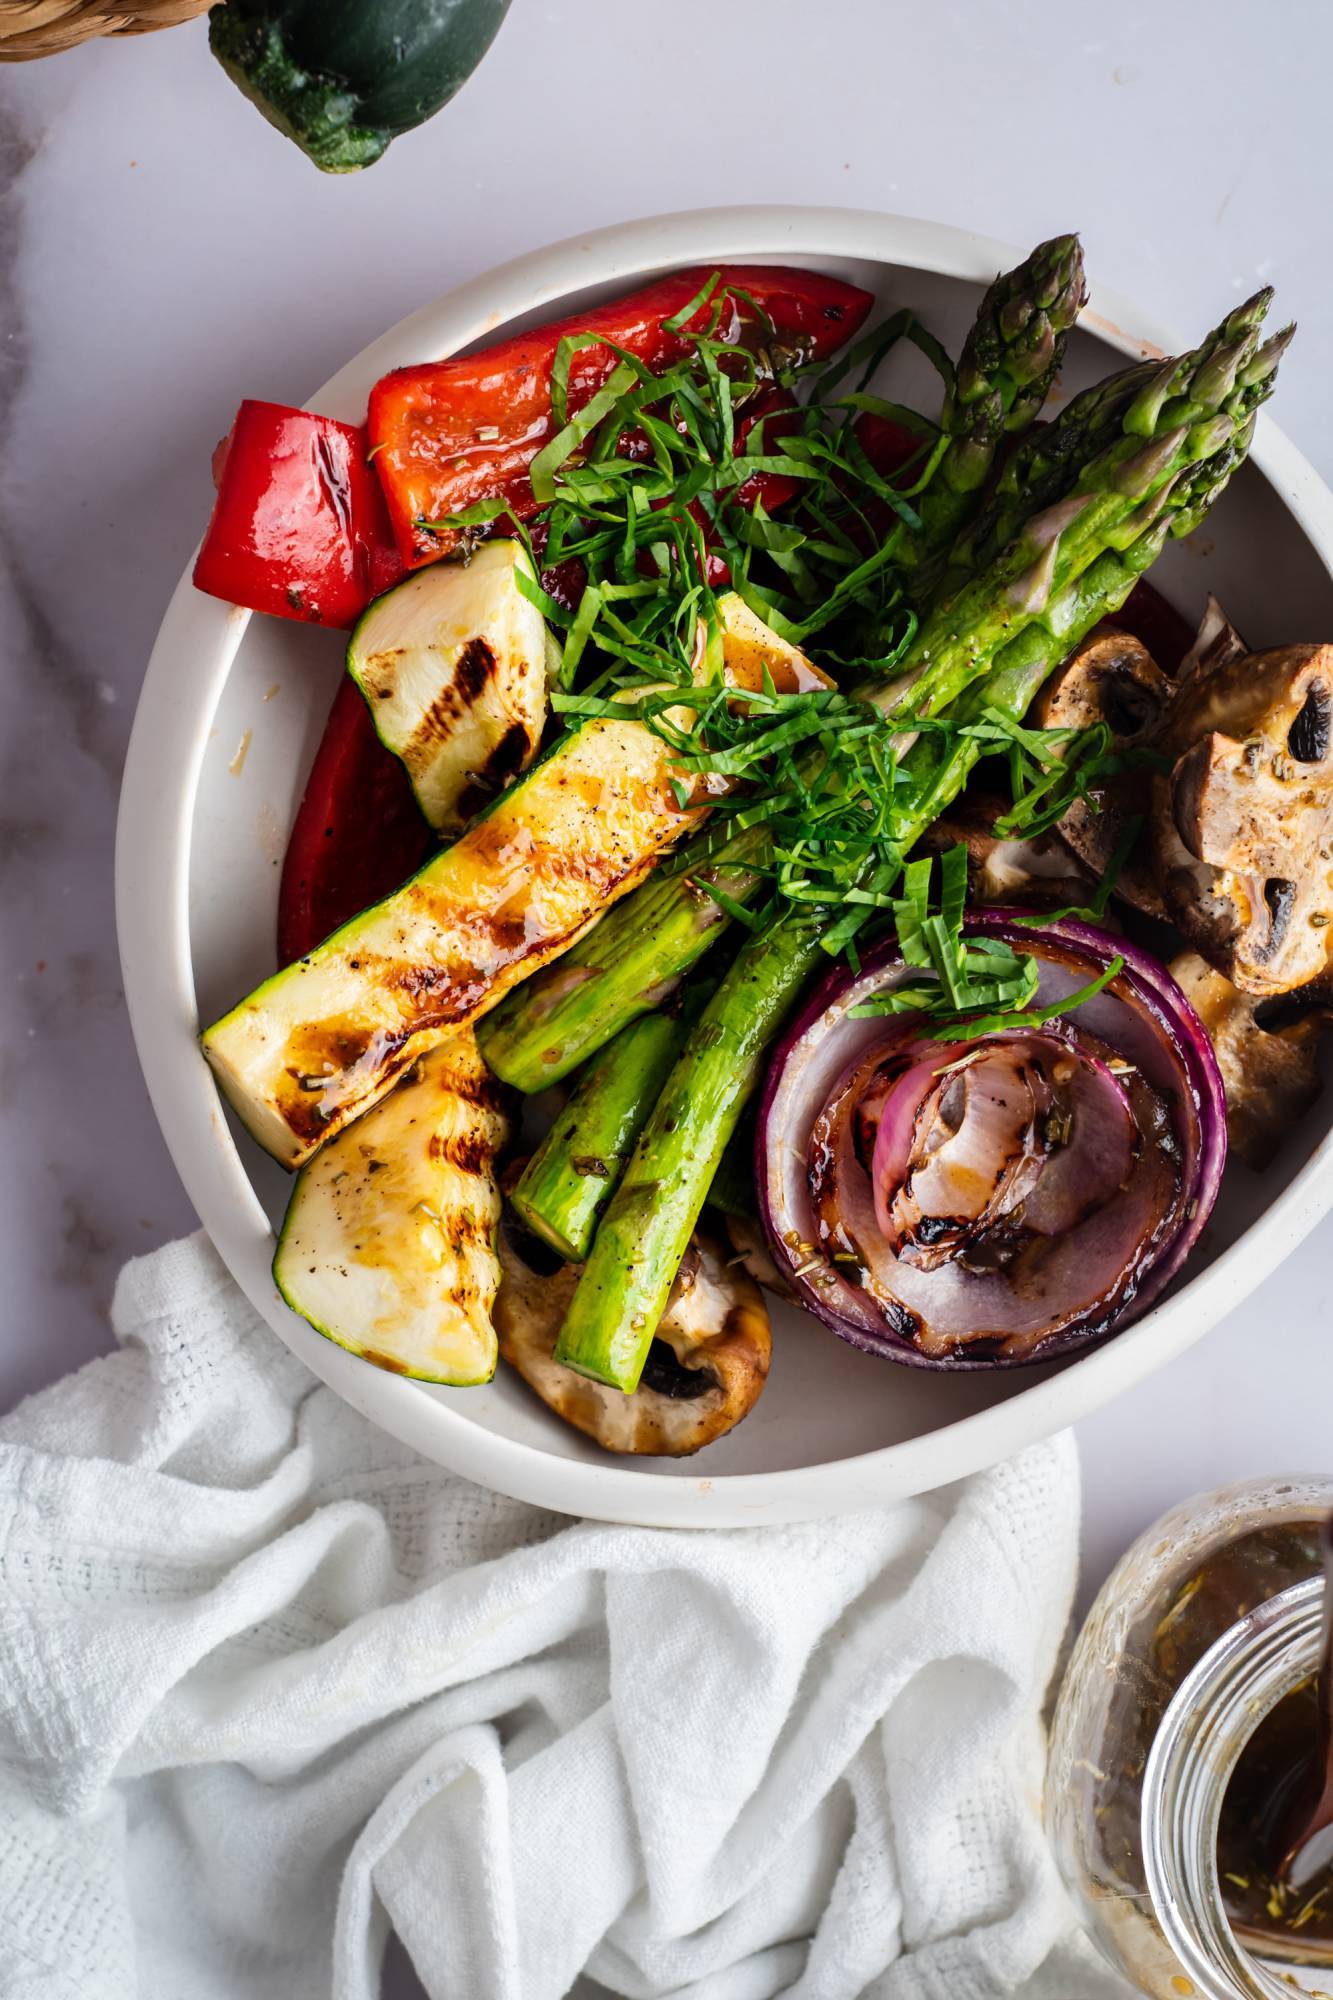 Grilled vegetables in a bowl with asparagus, zucchini, red onion, peppers, and mushrooms in balsamic marinade.